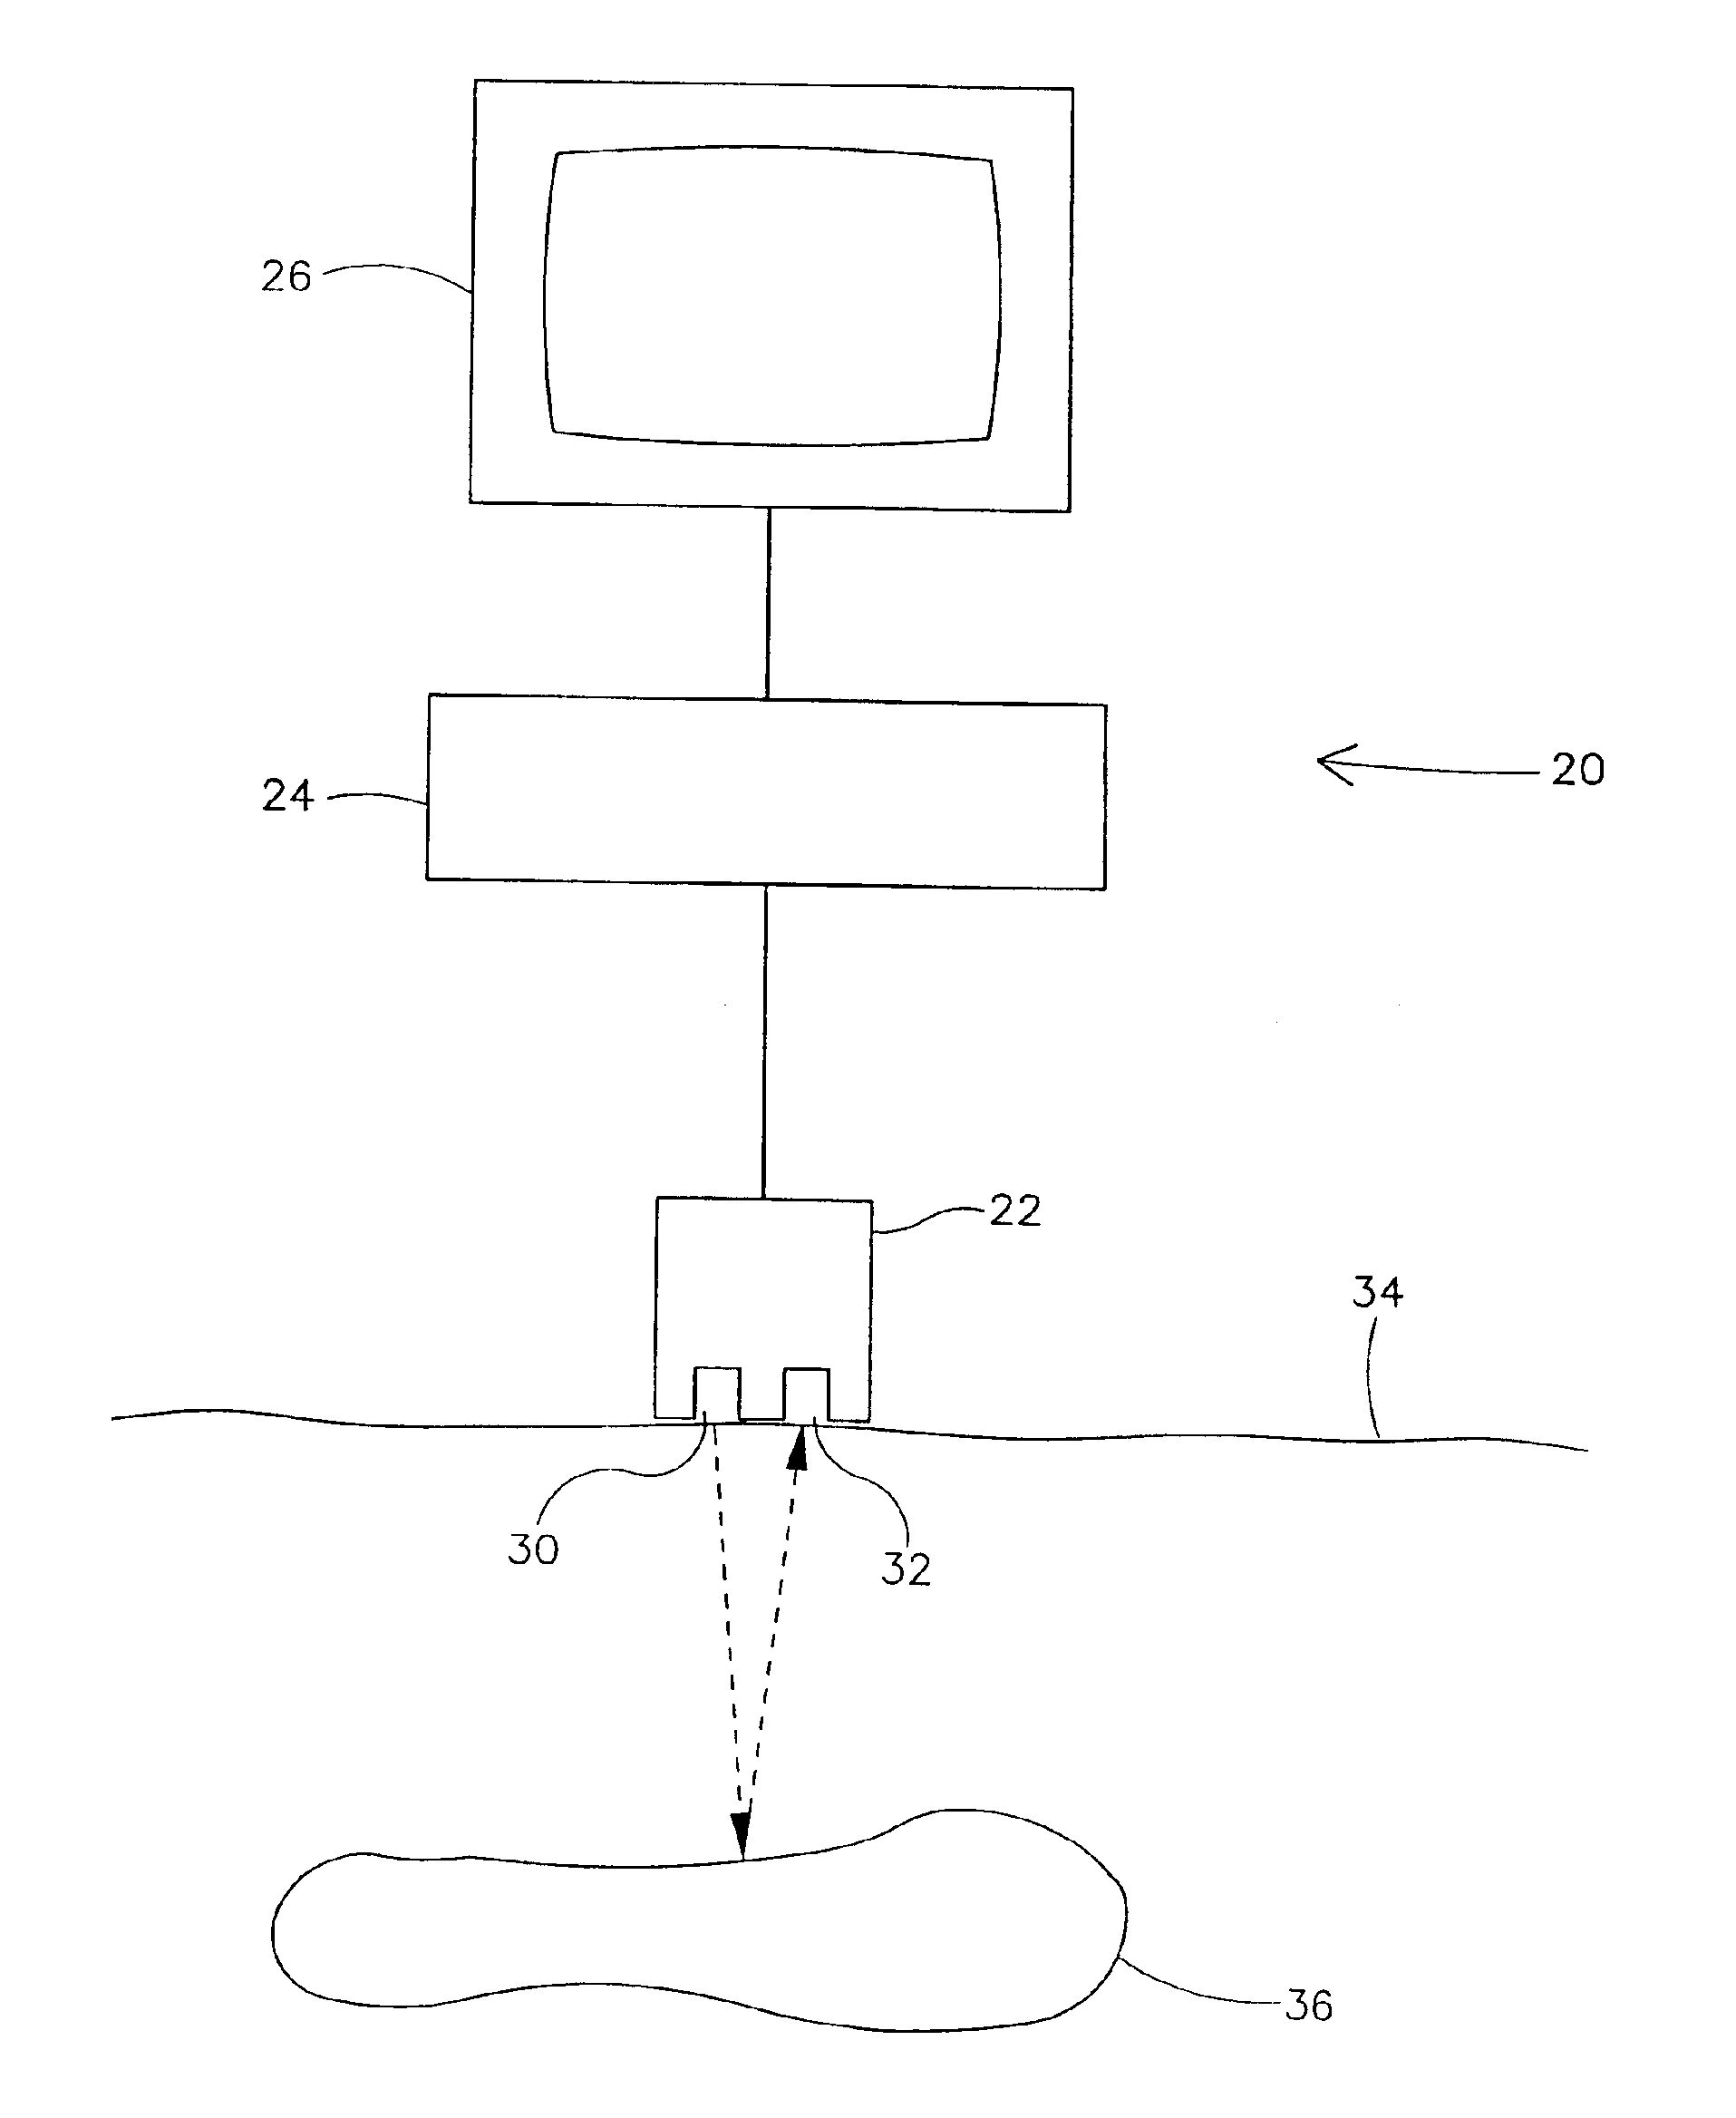 Method and apparatus for ultrasonic imaging